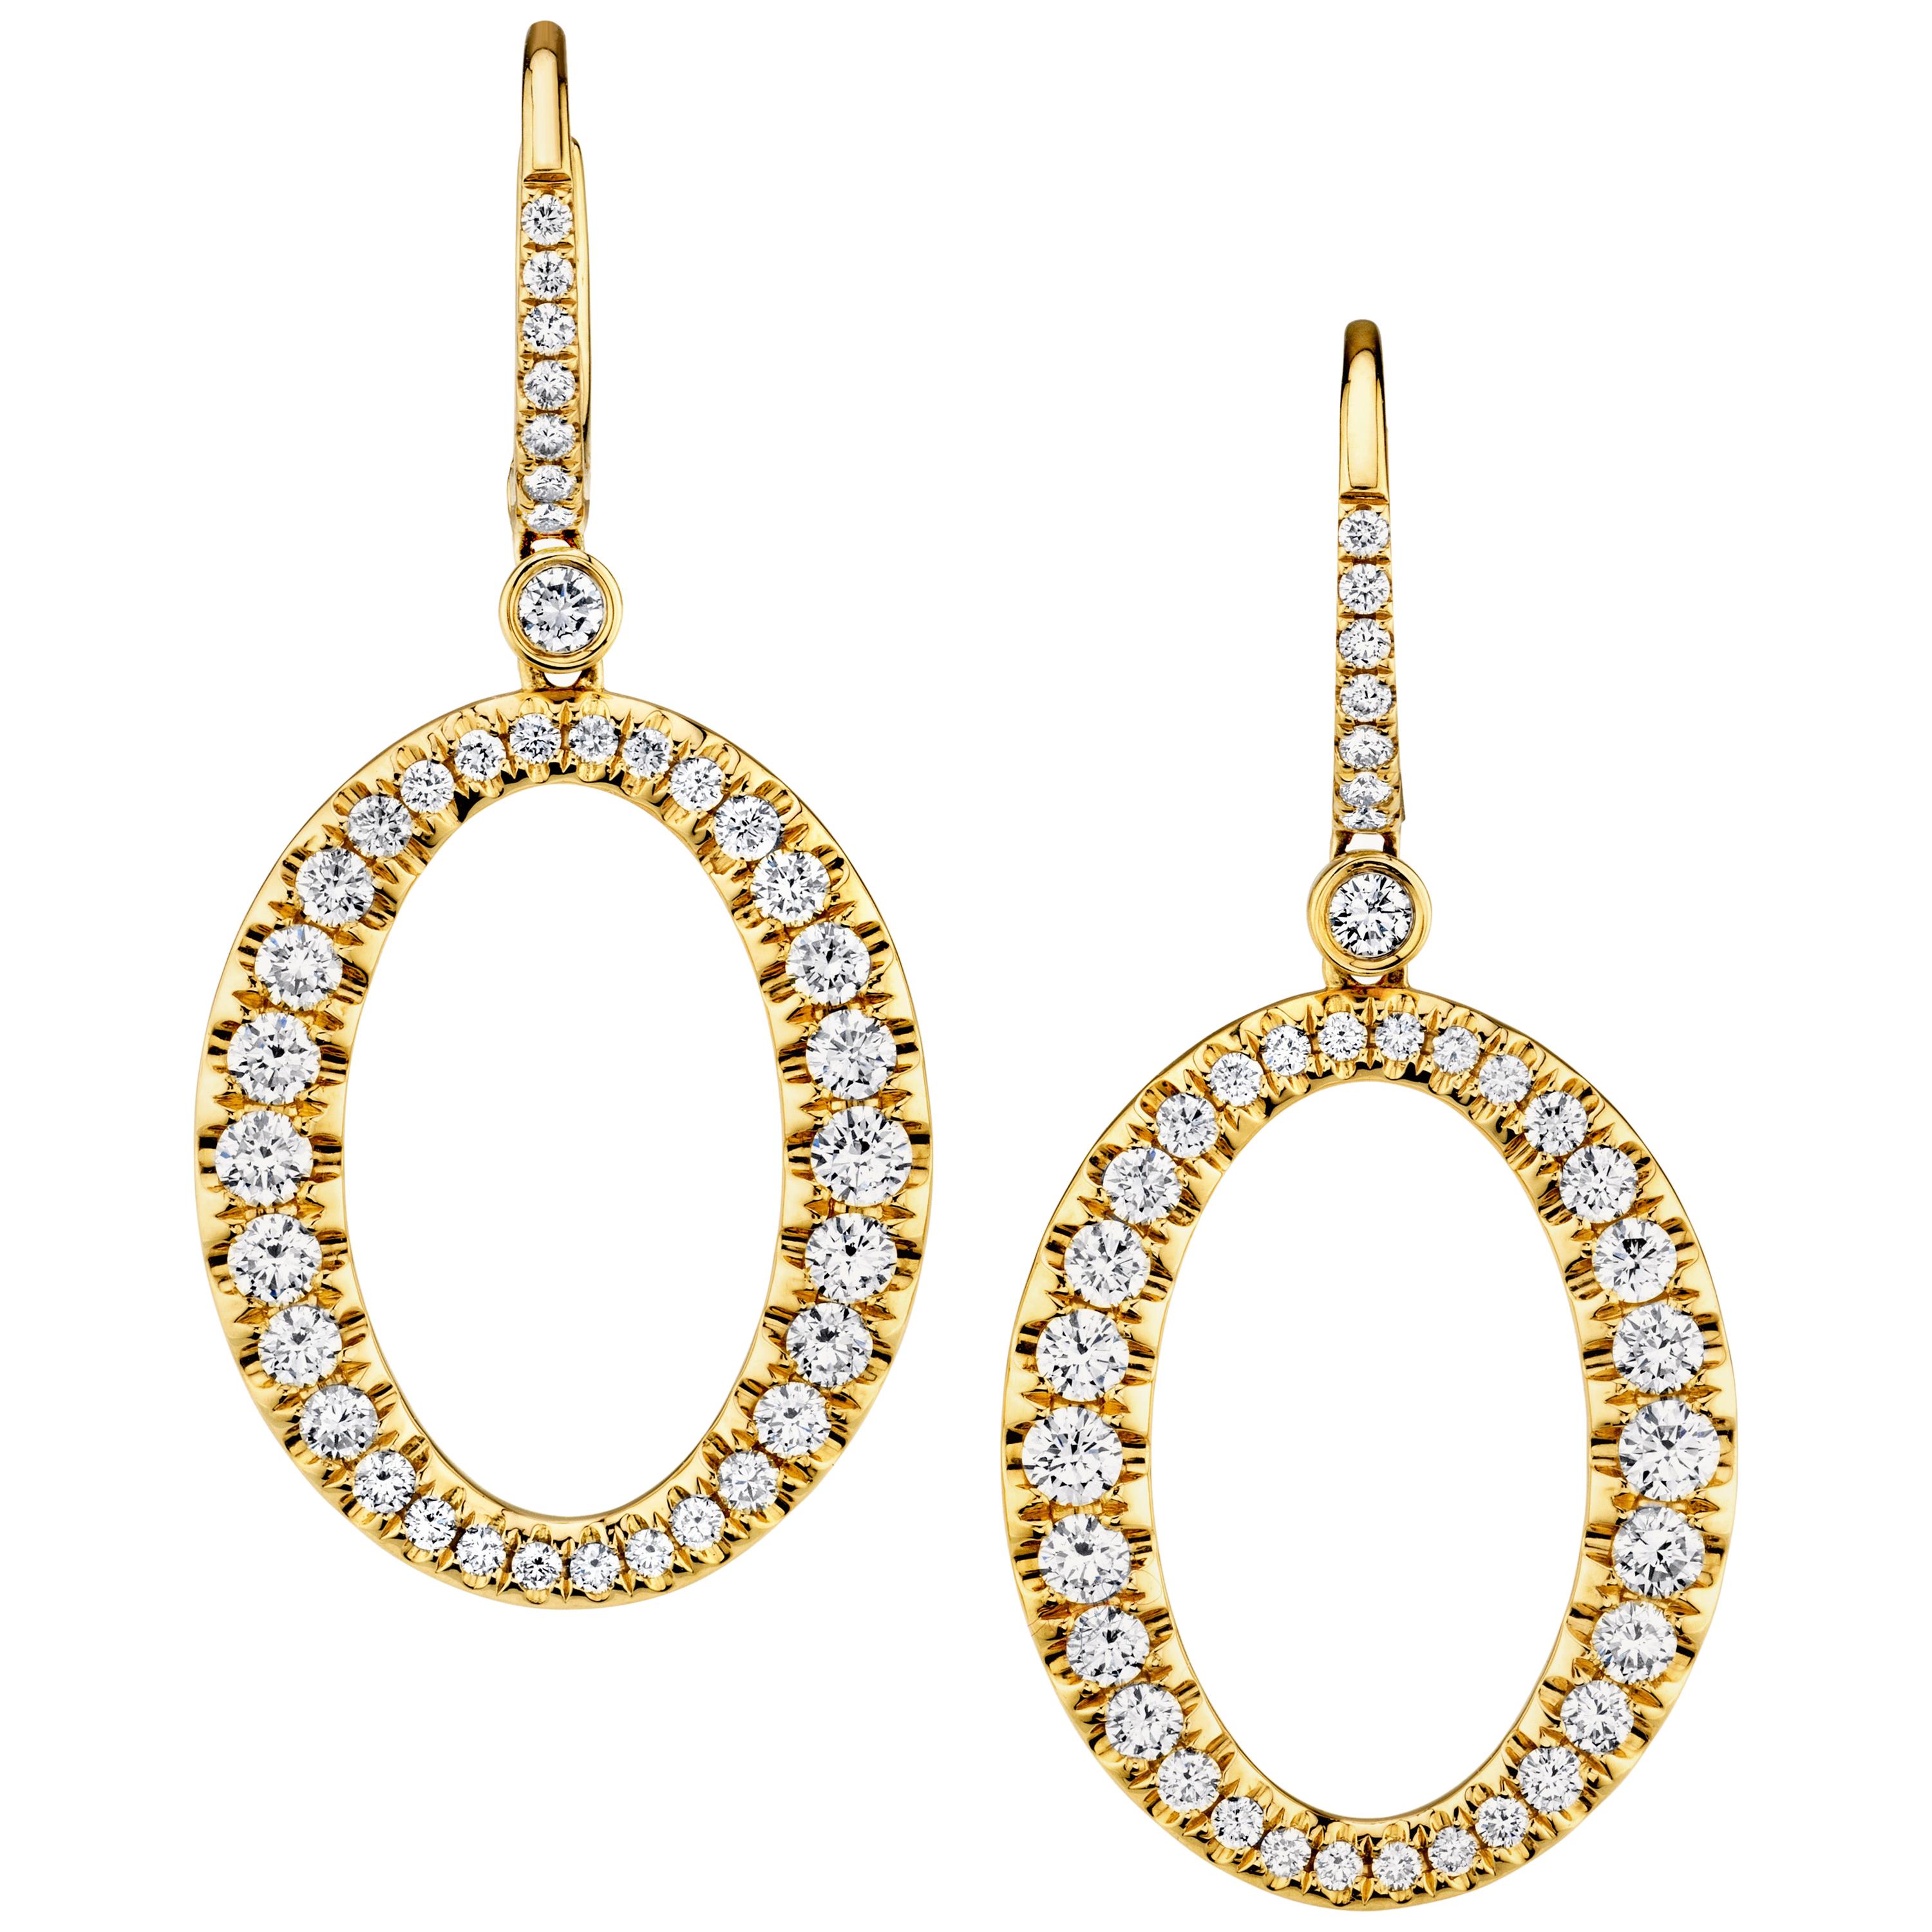 Diamond "O" Dangle Earrings in Yellow Gold, 2.06 Carats Total For Sale